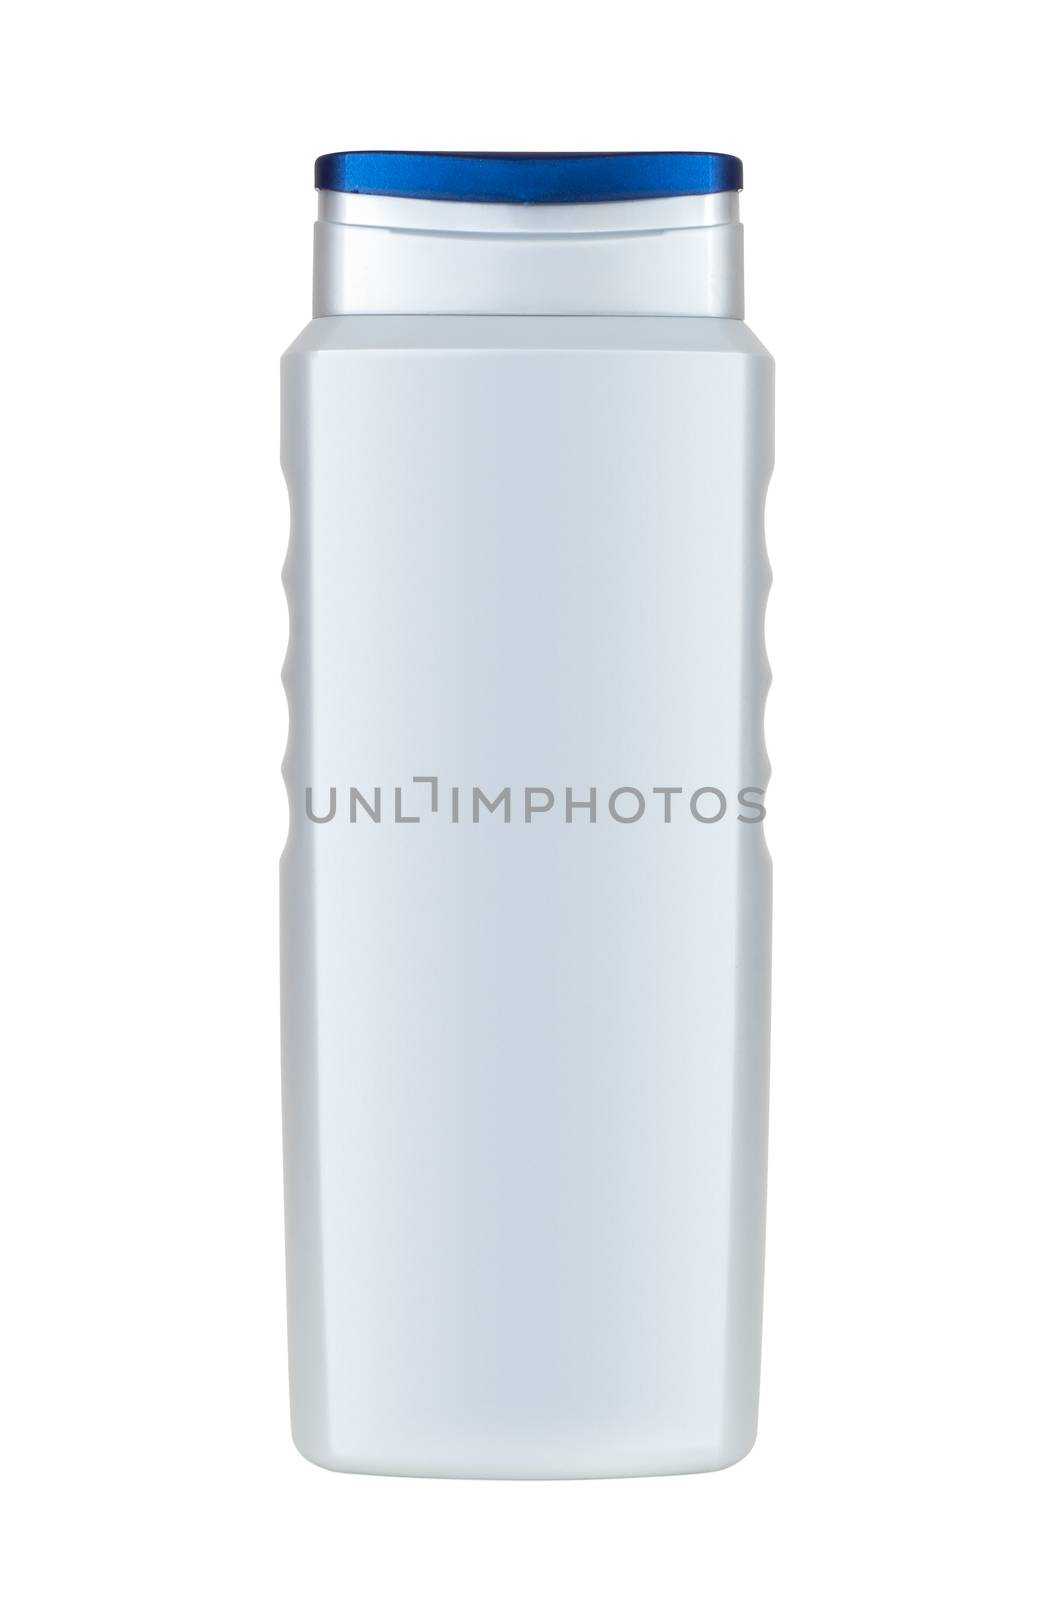 Cosmetic bottle on white background by mkos83